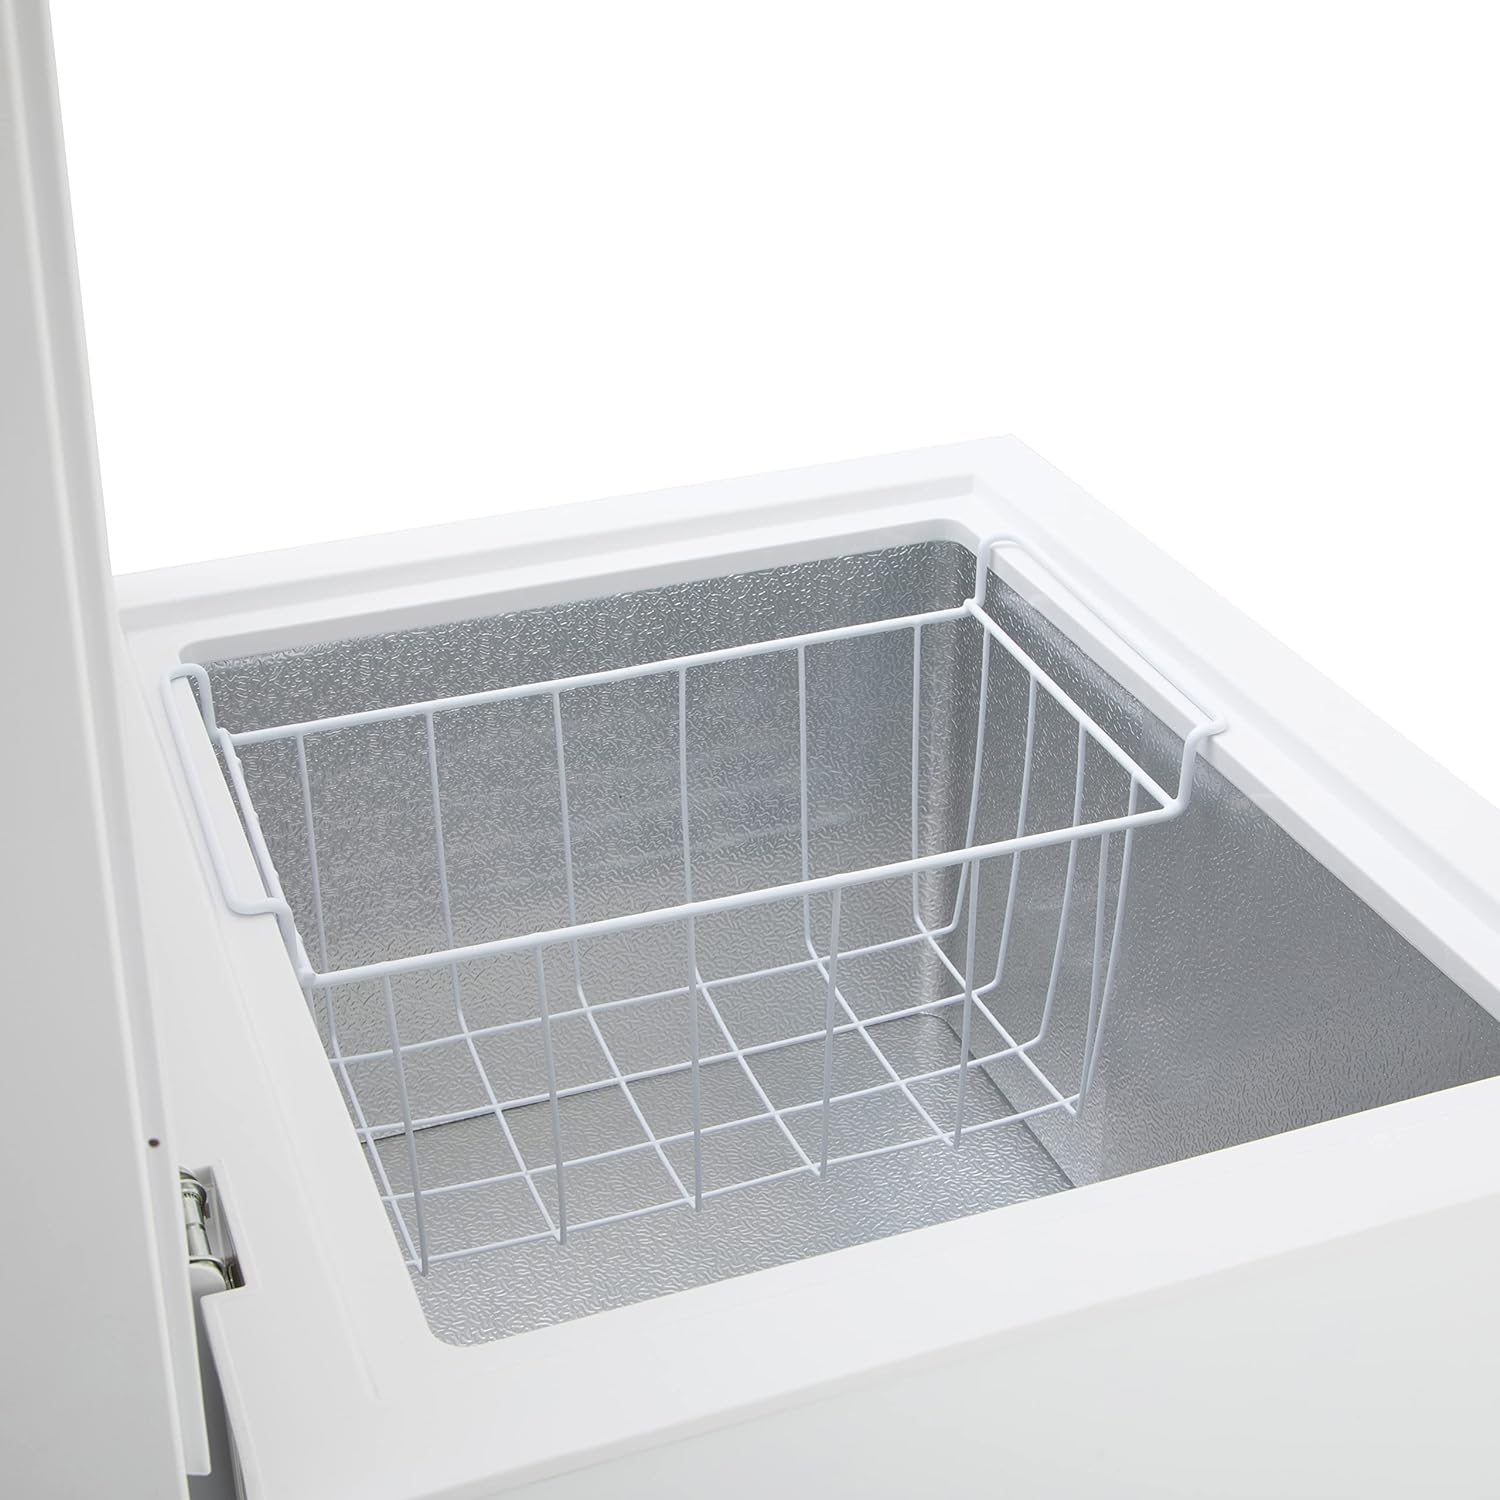 Willow W66CFW Freestanding 66L Chest Freezer with Removable Storage Basket, Suitable for Outbuildings and Garages, 2 Years Warranty - White - Amazing Gadgets Outlet